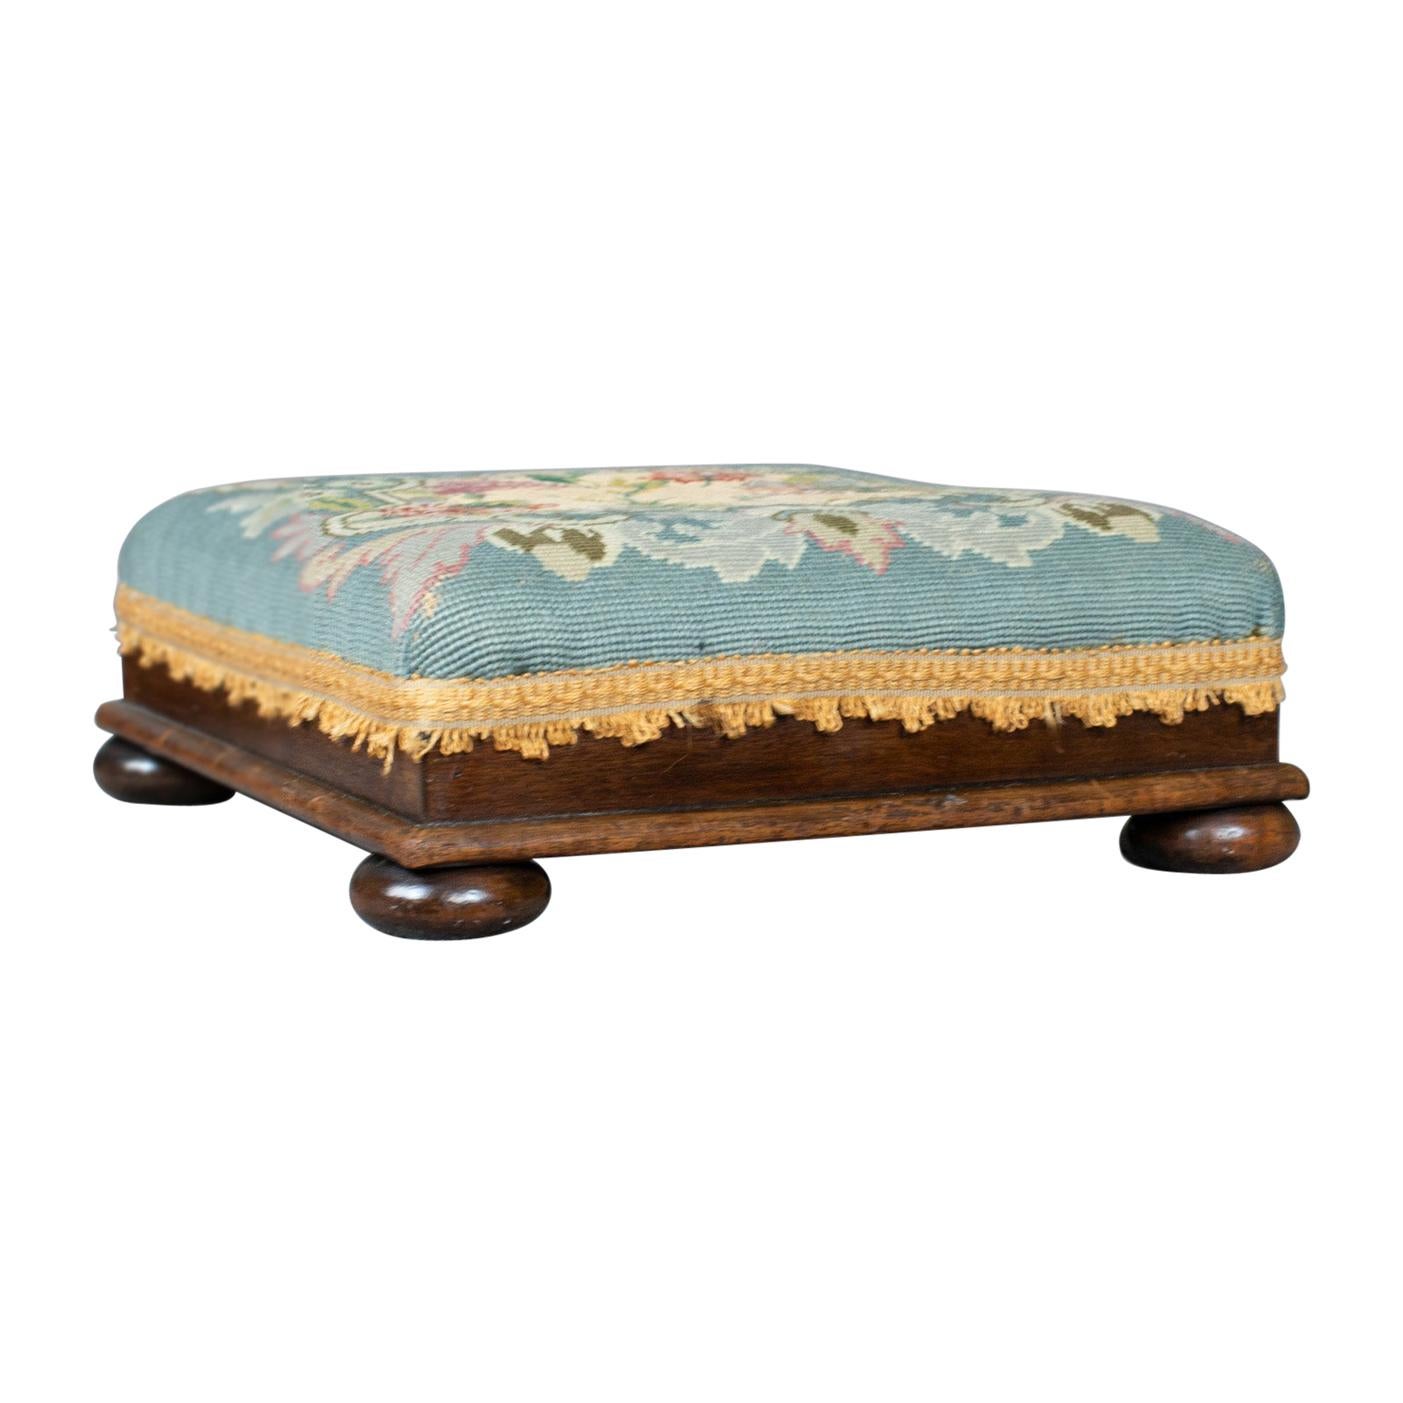 Square Antique Footstool, English, Victorian, Needlepoint, Carriage, circa 1890